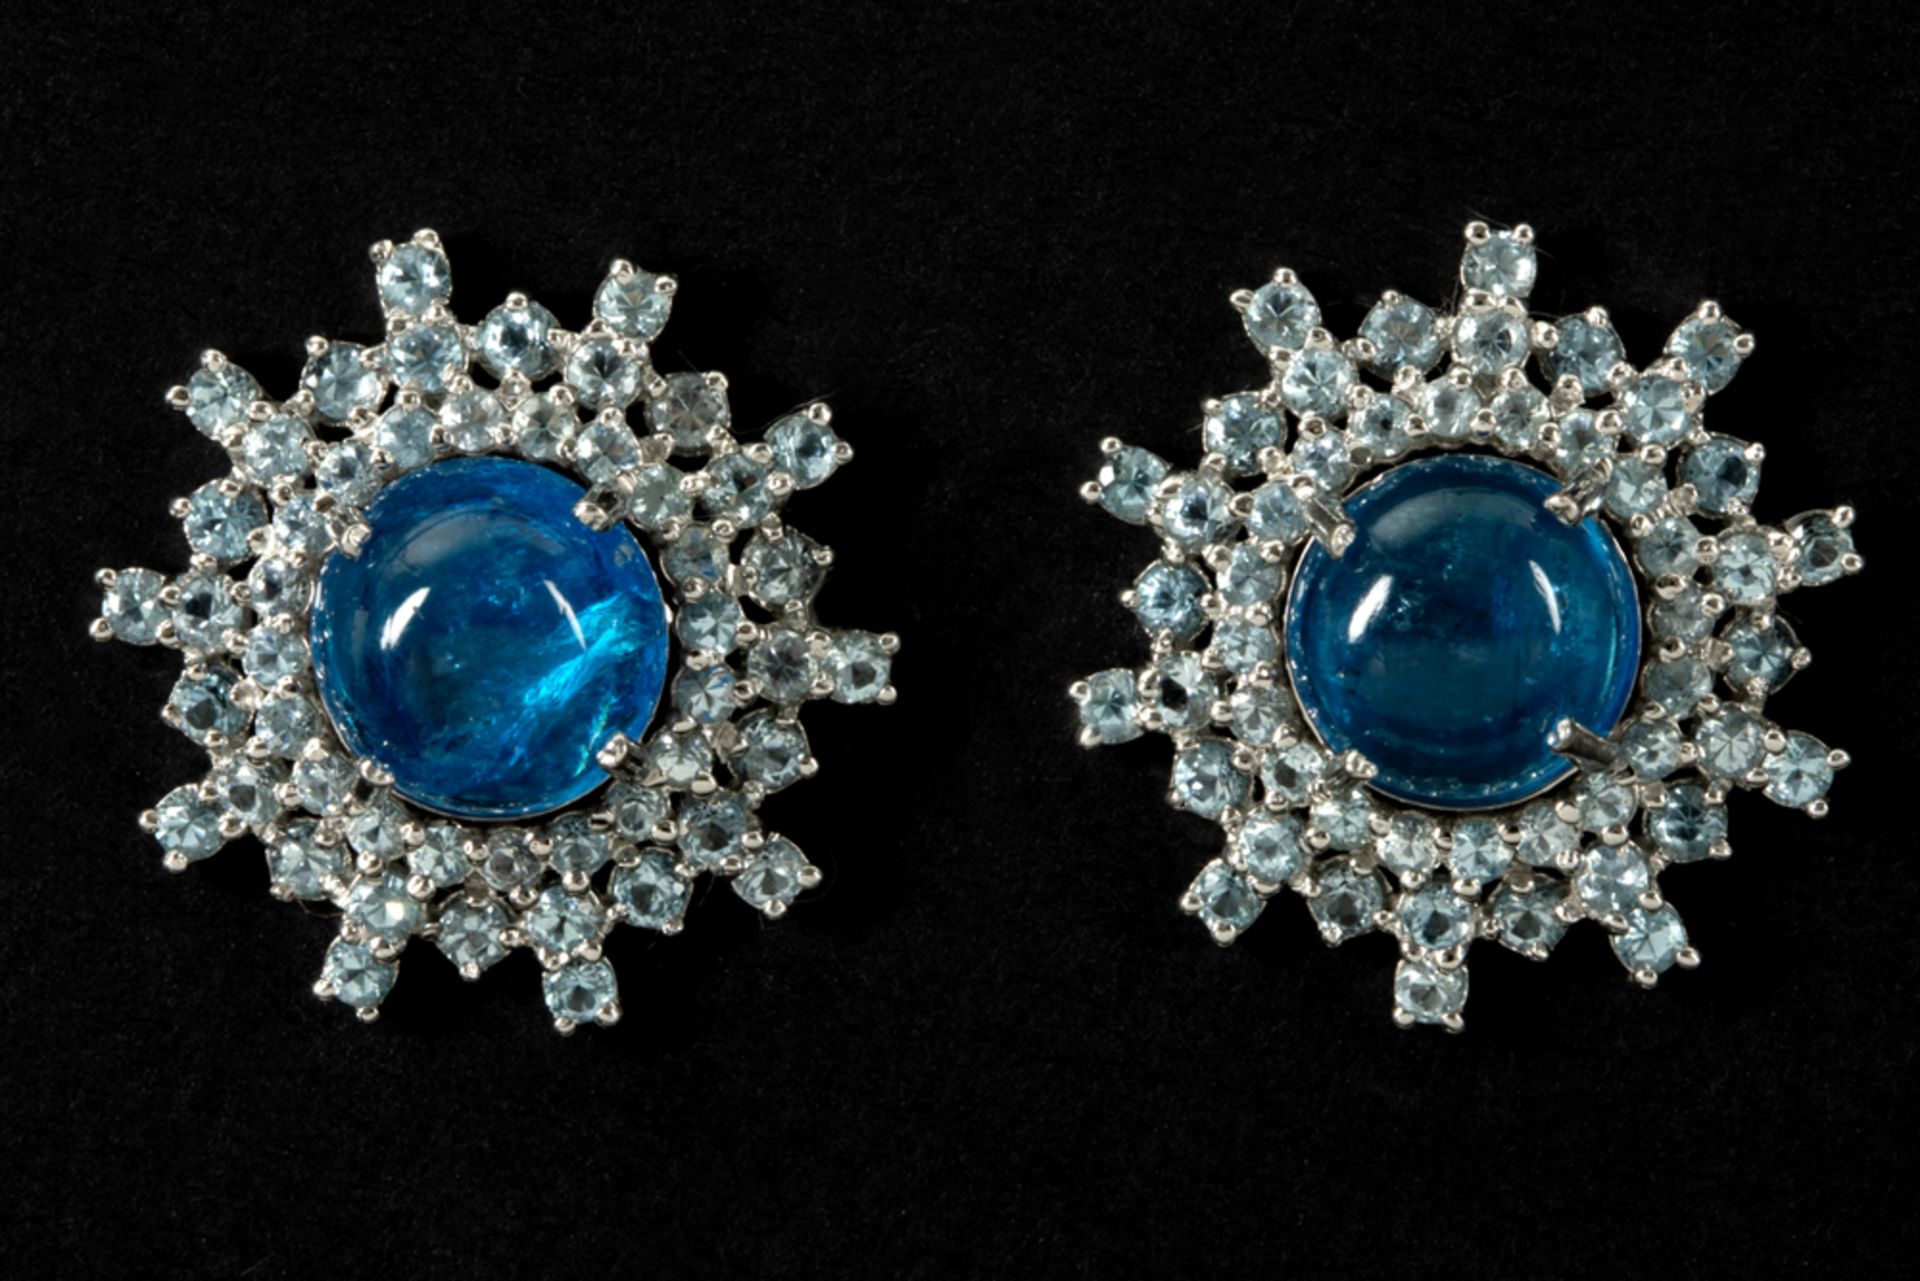 pair of handmade earrings in white gold (18 carat) with ca 5,80 carat of Apatites with cabochon